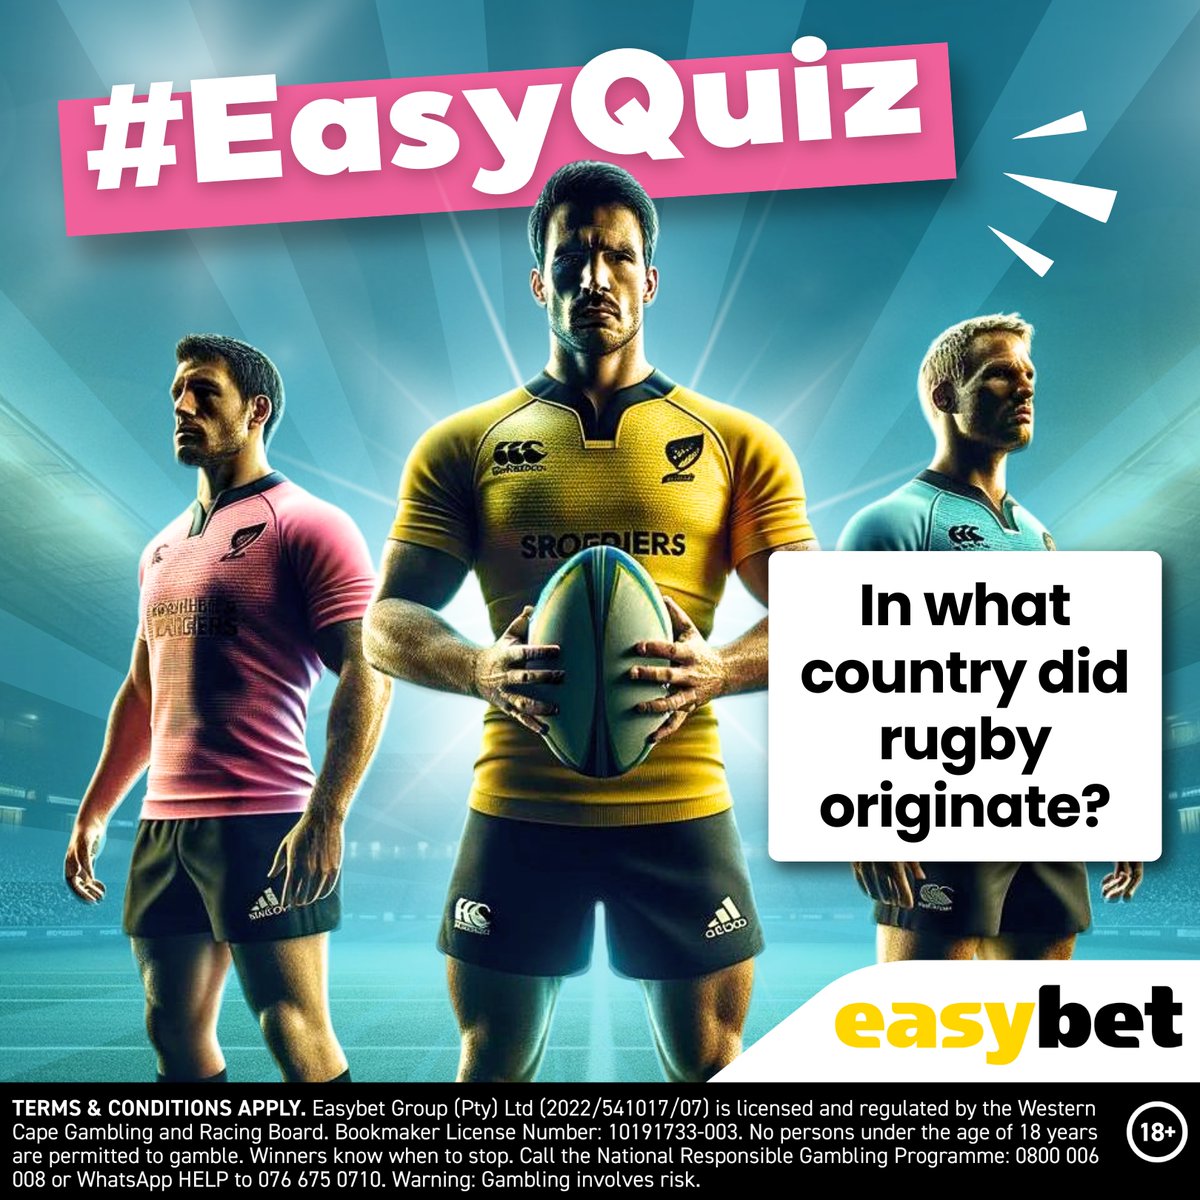 🏉 𝗧𝗶𝗺𝗲 𝘁𝗼 𝘁𝗮𝗰𝗸𝗹𝗲 𝘁𝗵𝗶𝘀 #𝗘𝗮𝘀𝘆𝗤𝘂𝗶𝘇! 🏉

Where did the mighty sport of rugby first kick off? 🌎

Drop your answer below for a chance to score big with Easybet! 🏆

#Easybet #EasyQuiz #Rugby